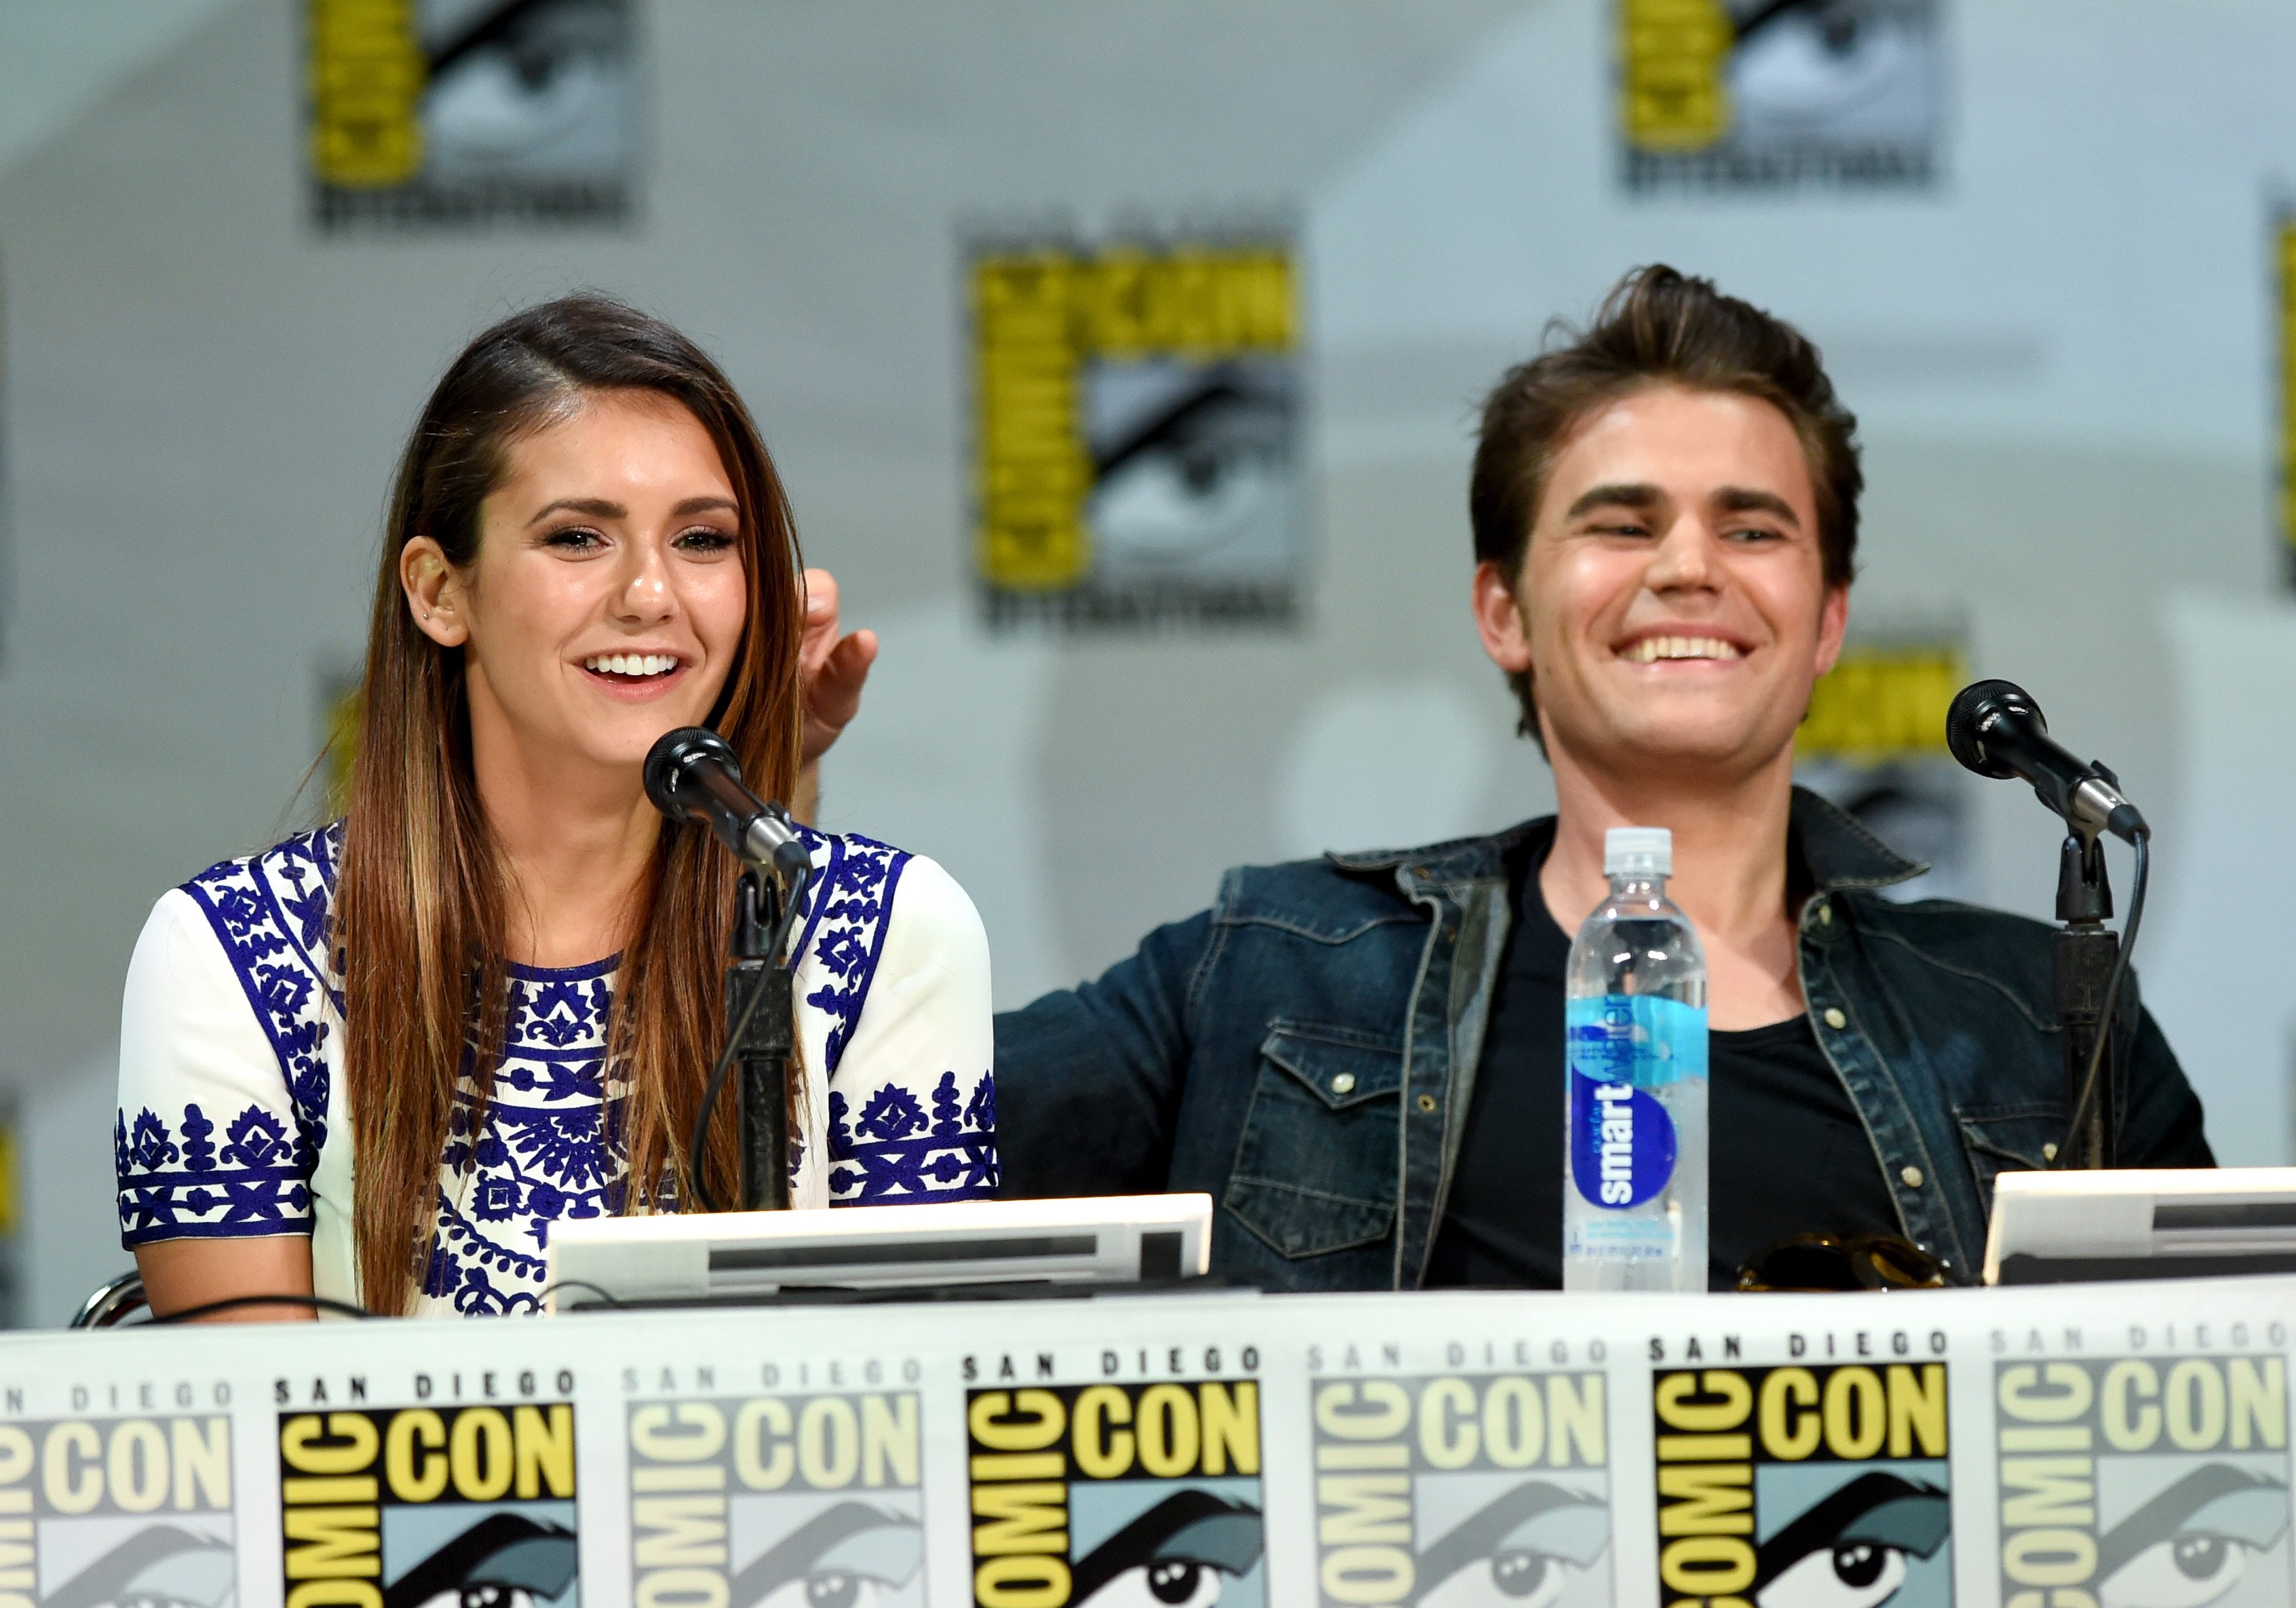 How to Watch 'The Vampire Diaries' After It Leaves Netflix